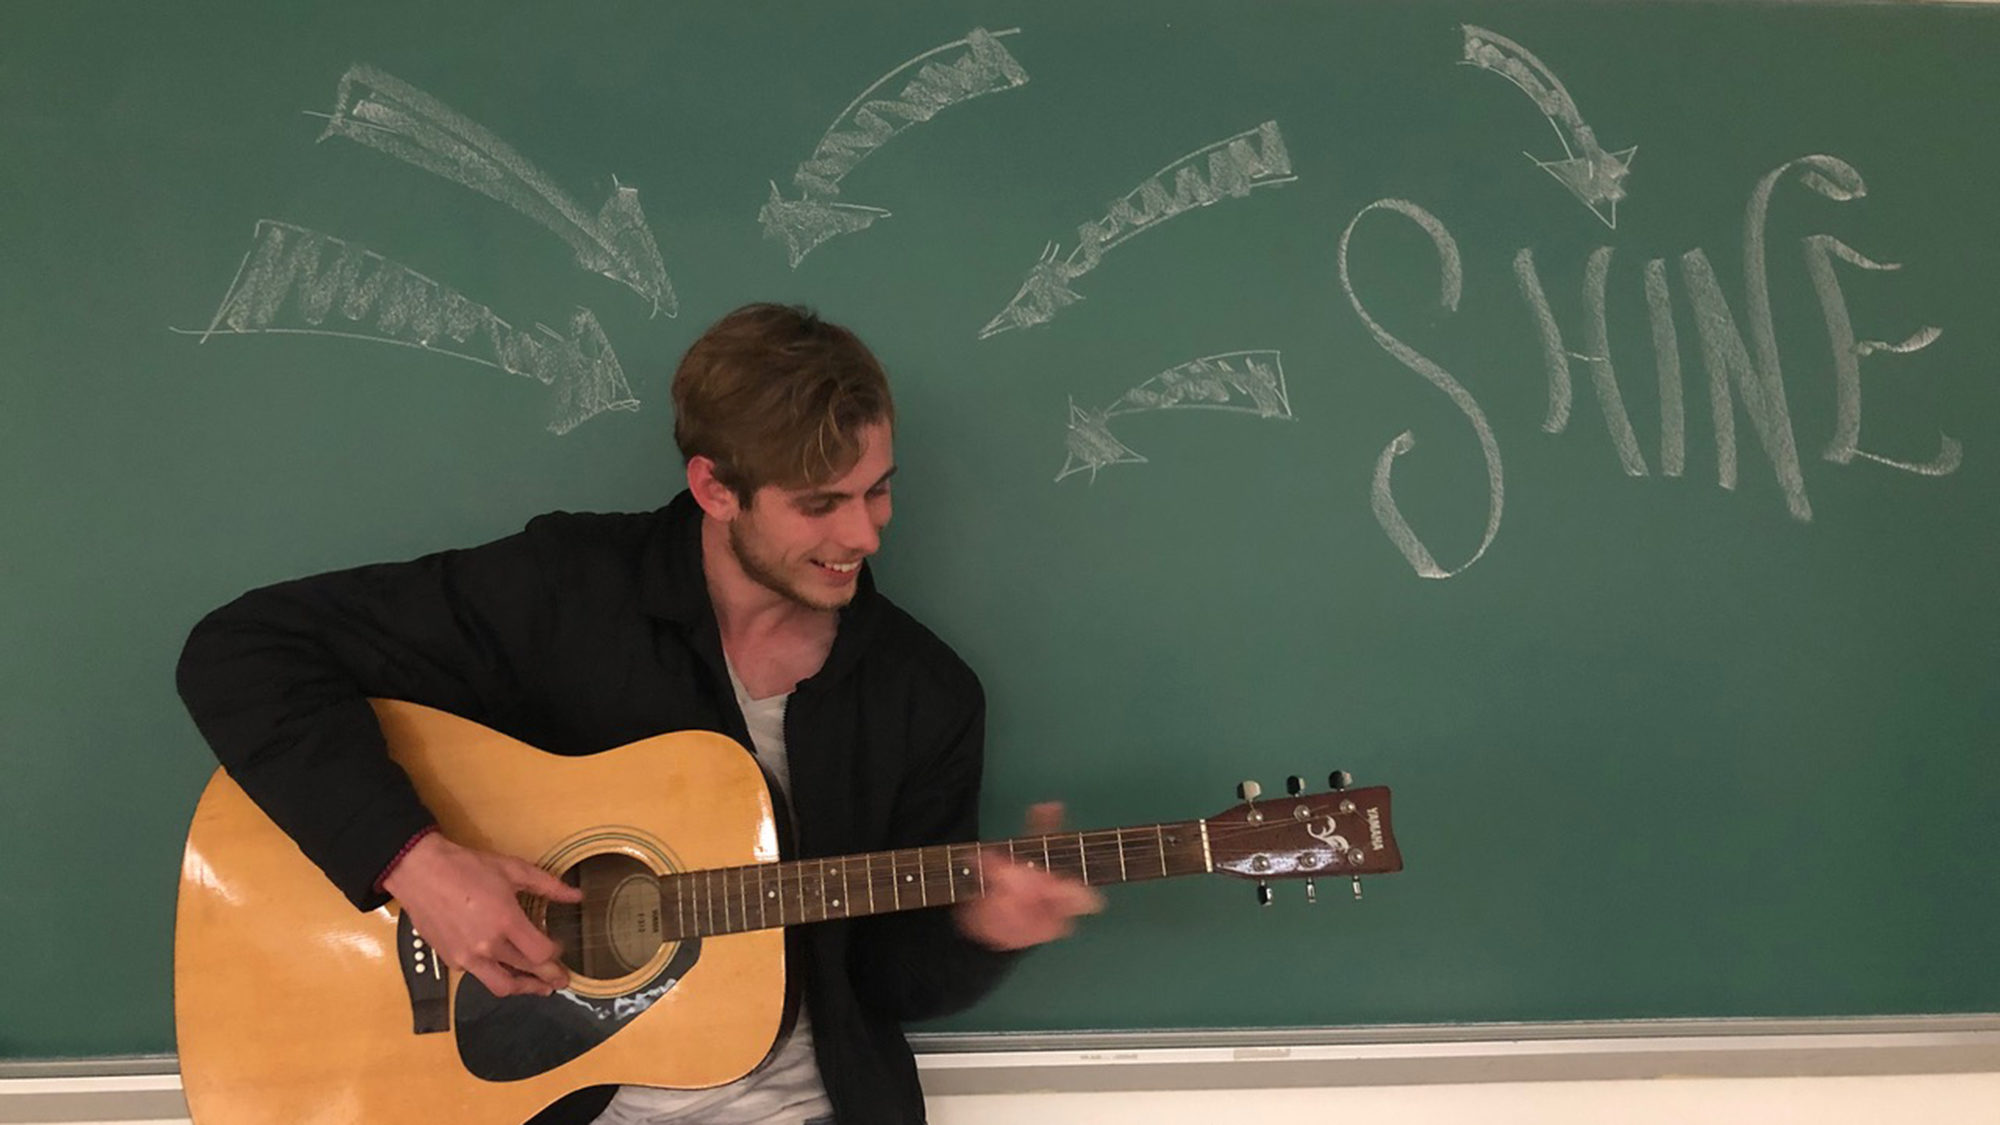 Kent Hall playing guitar in front of a black board chalked with arrows pointing toward him and another arrow pointing away from him and the word Shine.